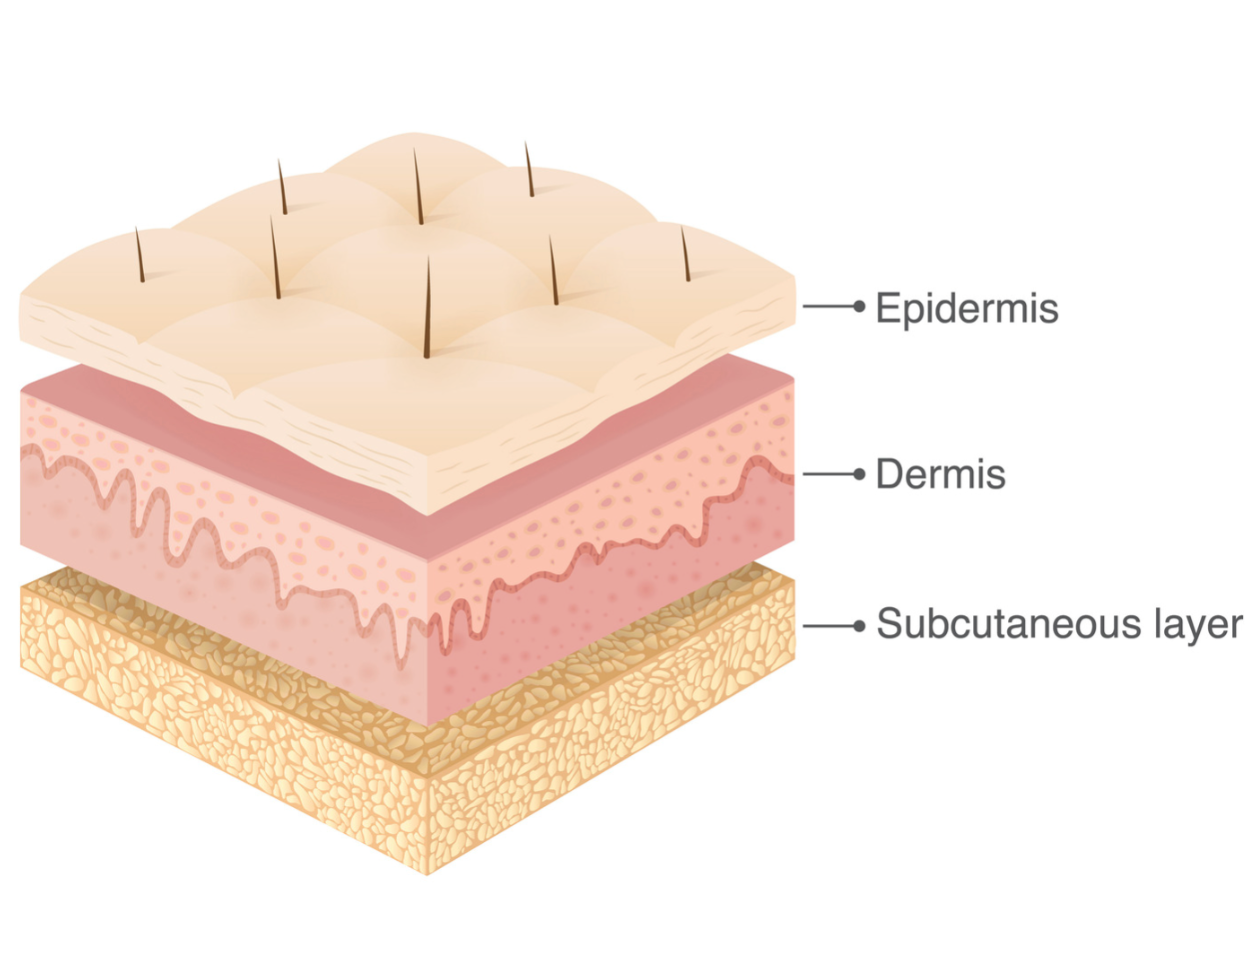 3 main layers of the skin